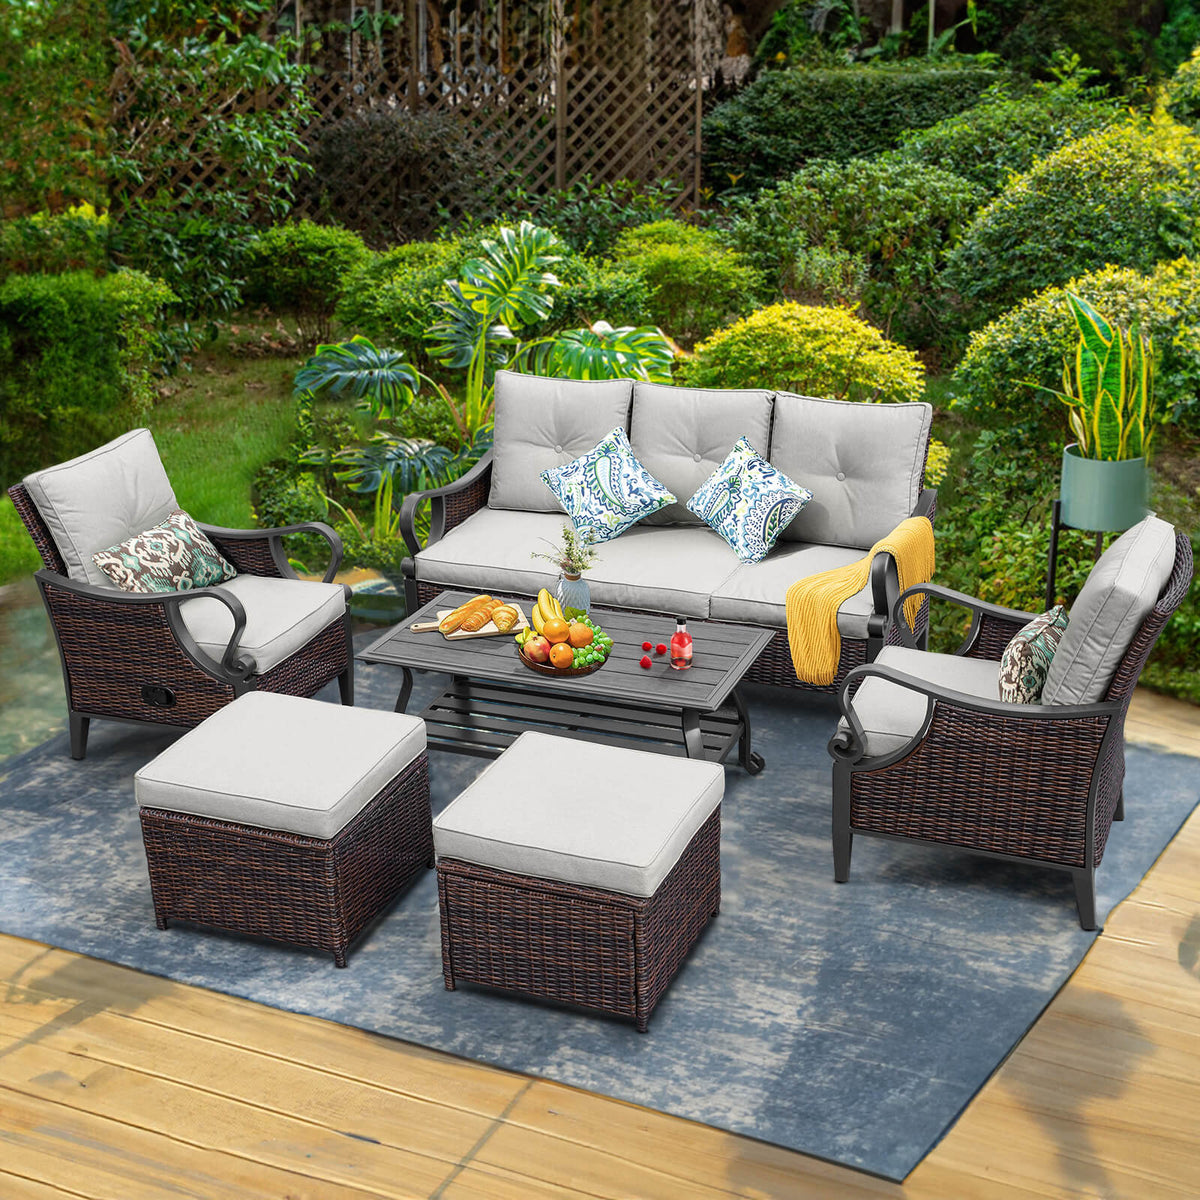 Upgraded 6 Pcs Outdoor Sectional Sofa with Reclining Backrest, Storage Table, Ottomans, Light Grey Cushions